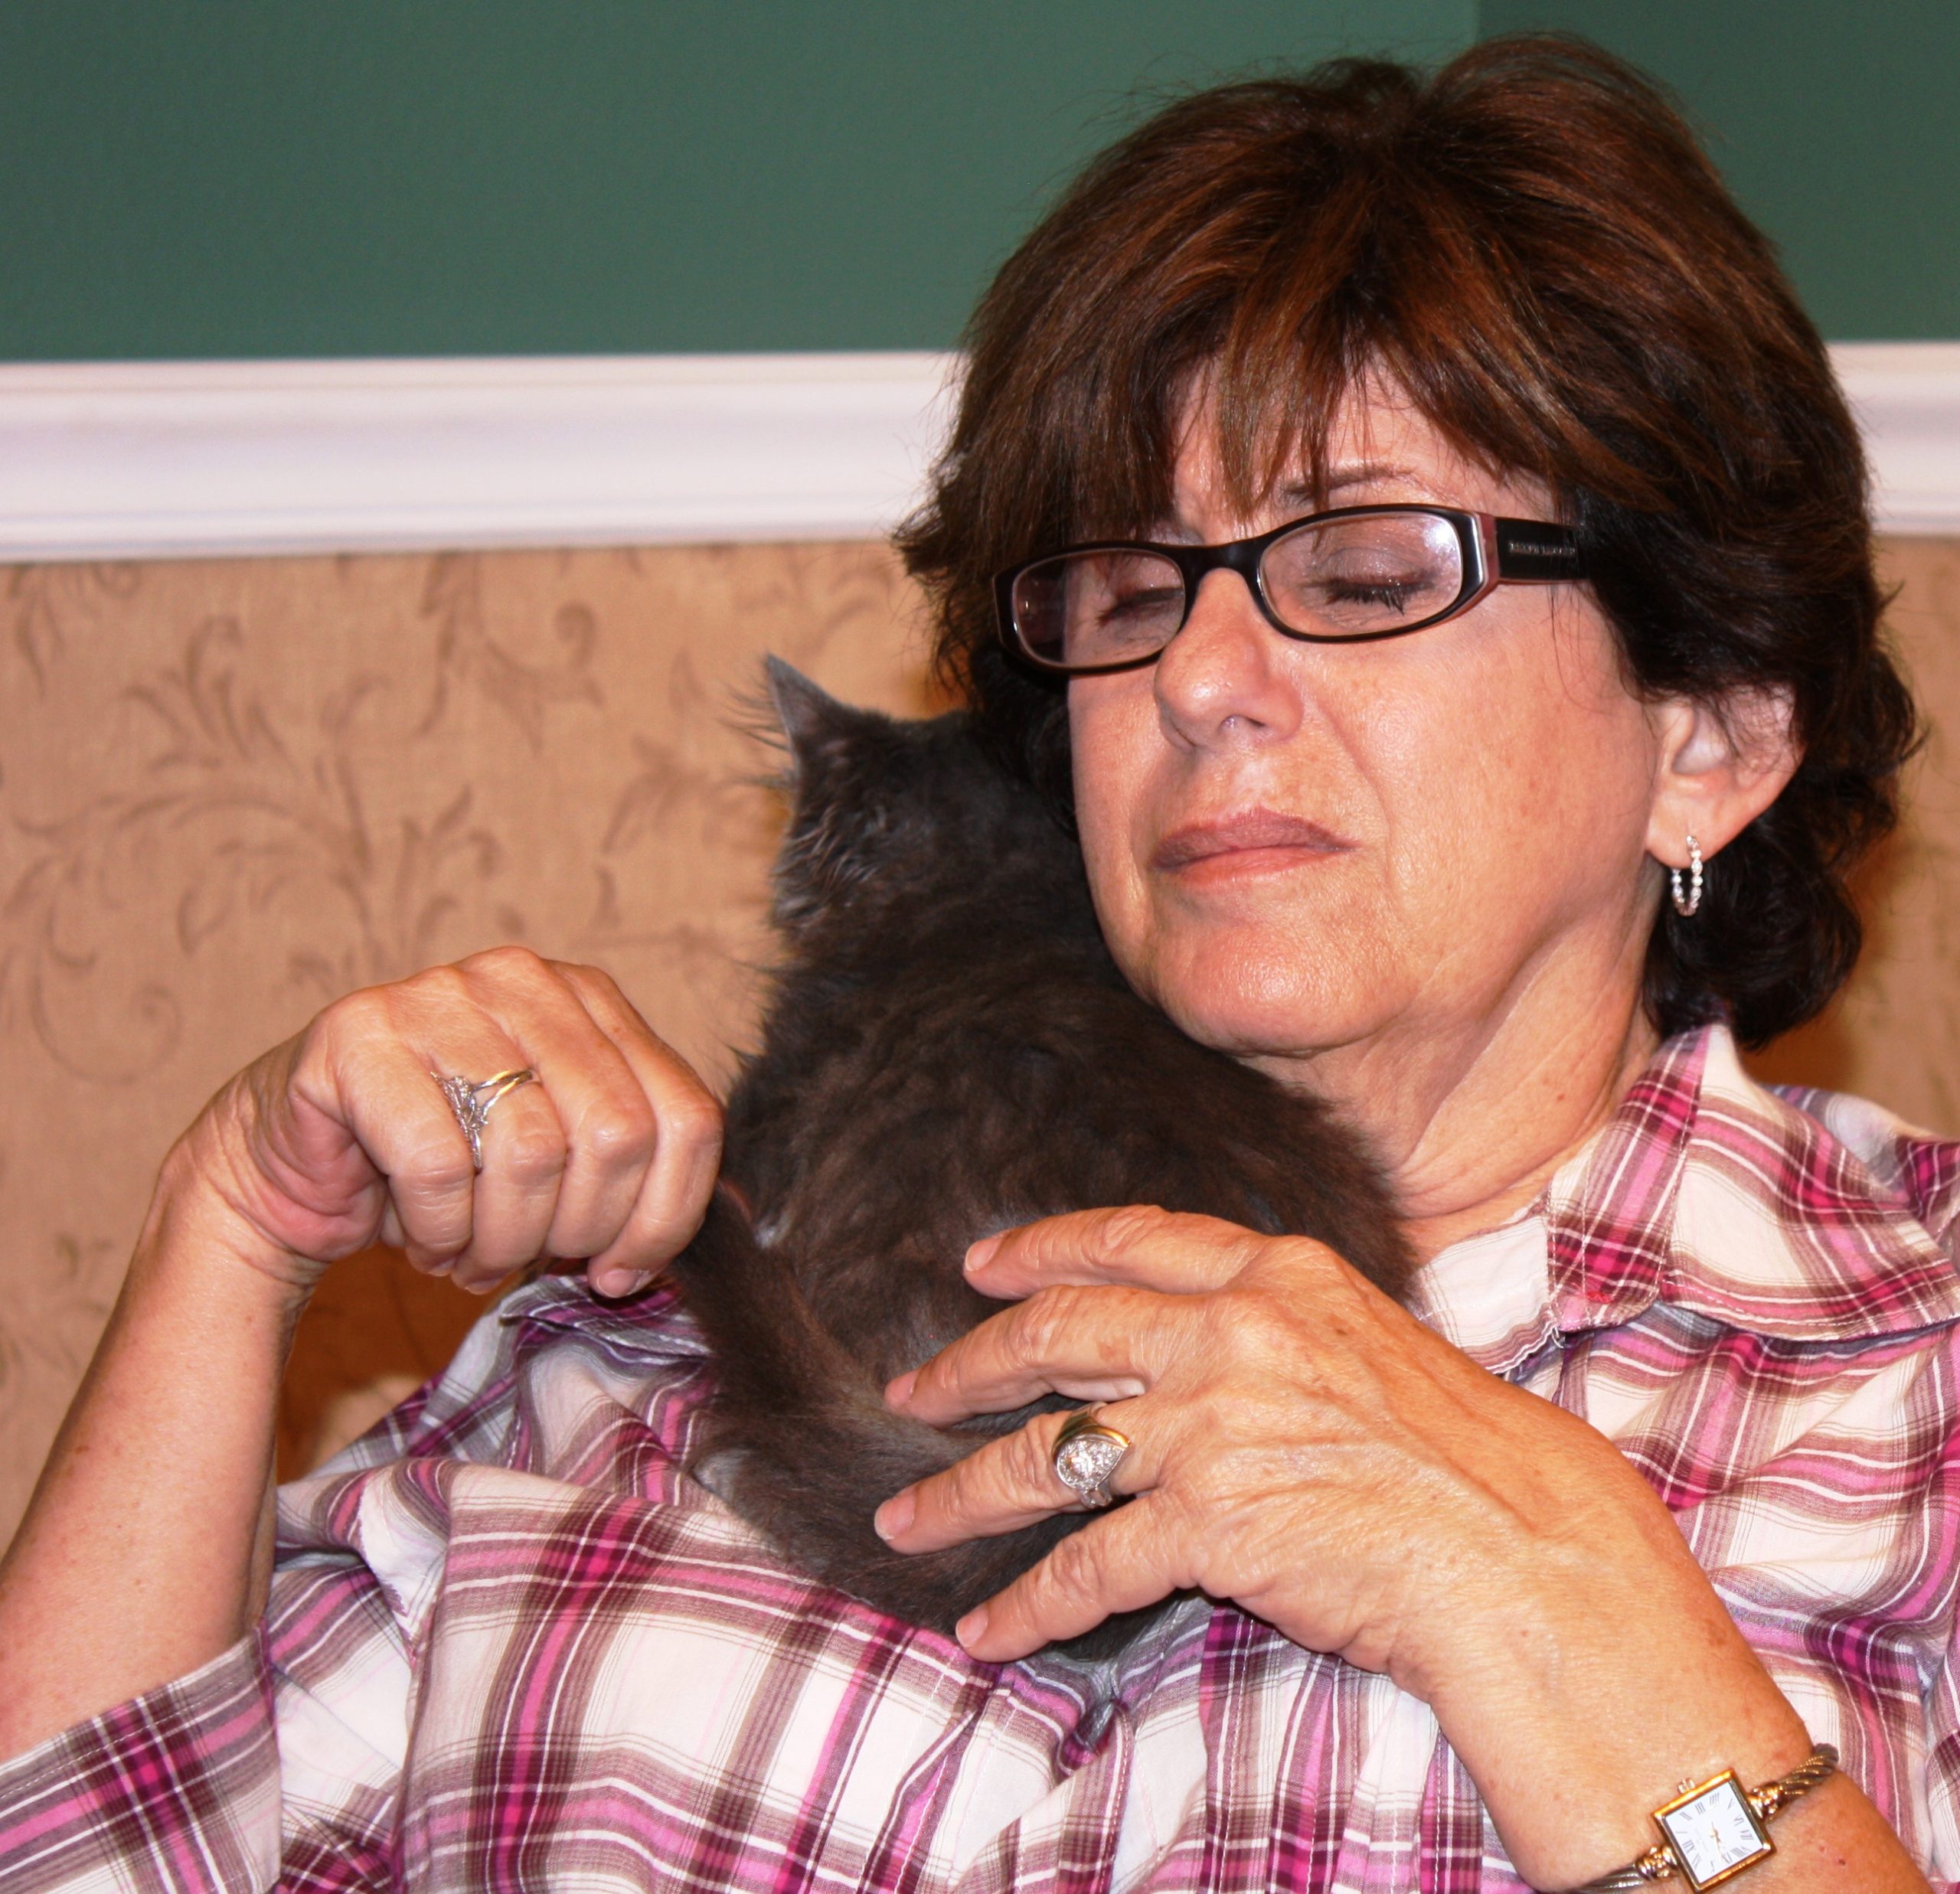 Does it look like this cat hates her owner? Photo by Jacqueline Munera.